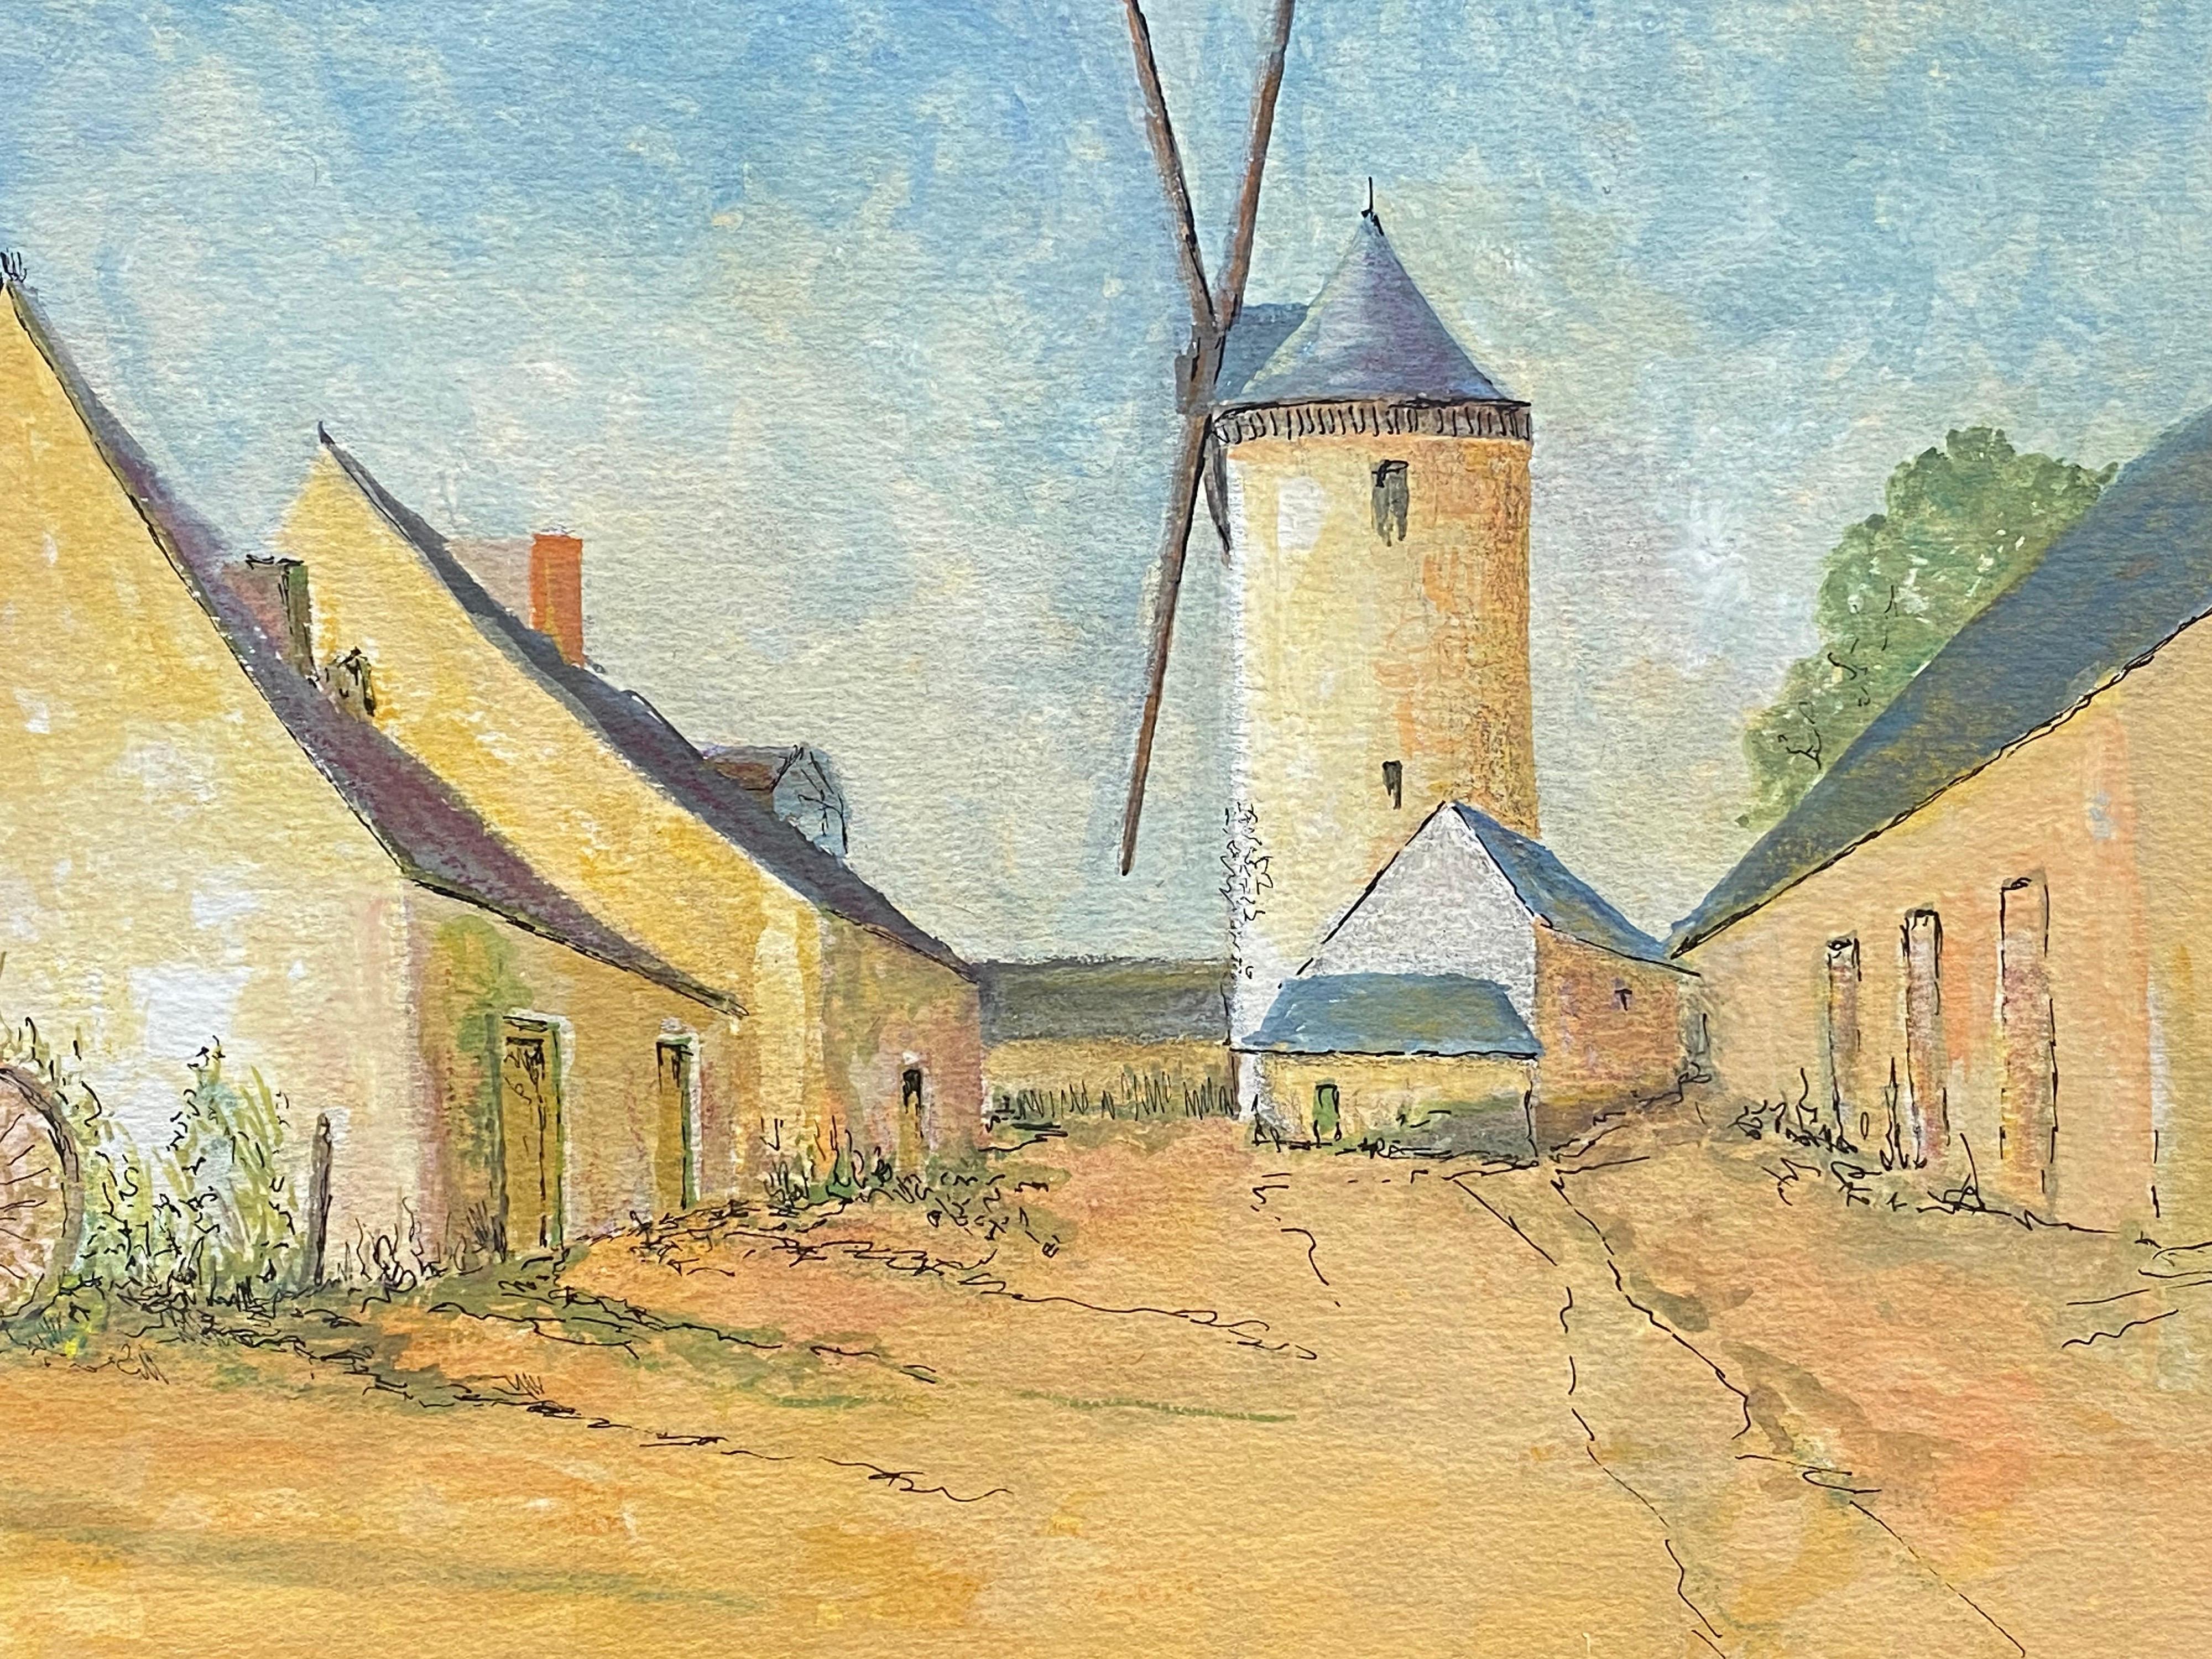 The Windmill
by Bernard Labbe (French mid 20th century)
signed original watercolour/ gouache painting on paper , unframed
size: 10 x 14 inches
condition: very good and ready to be enjoyed. 

provenance: the artists atelier/ studio, France